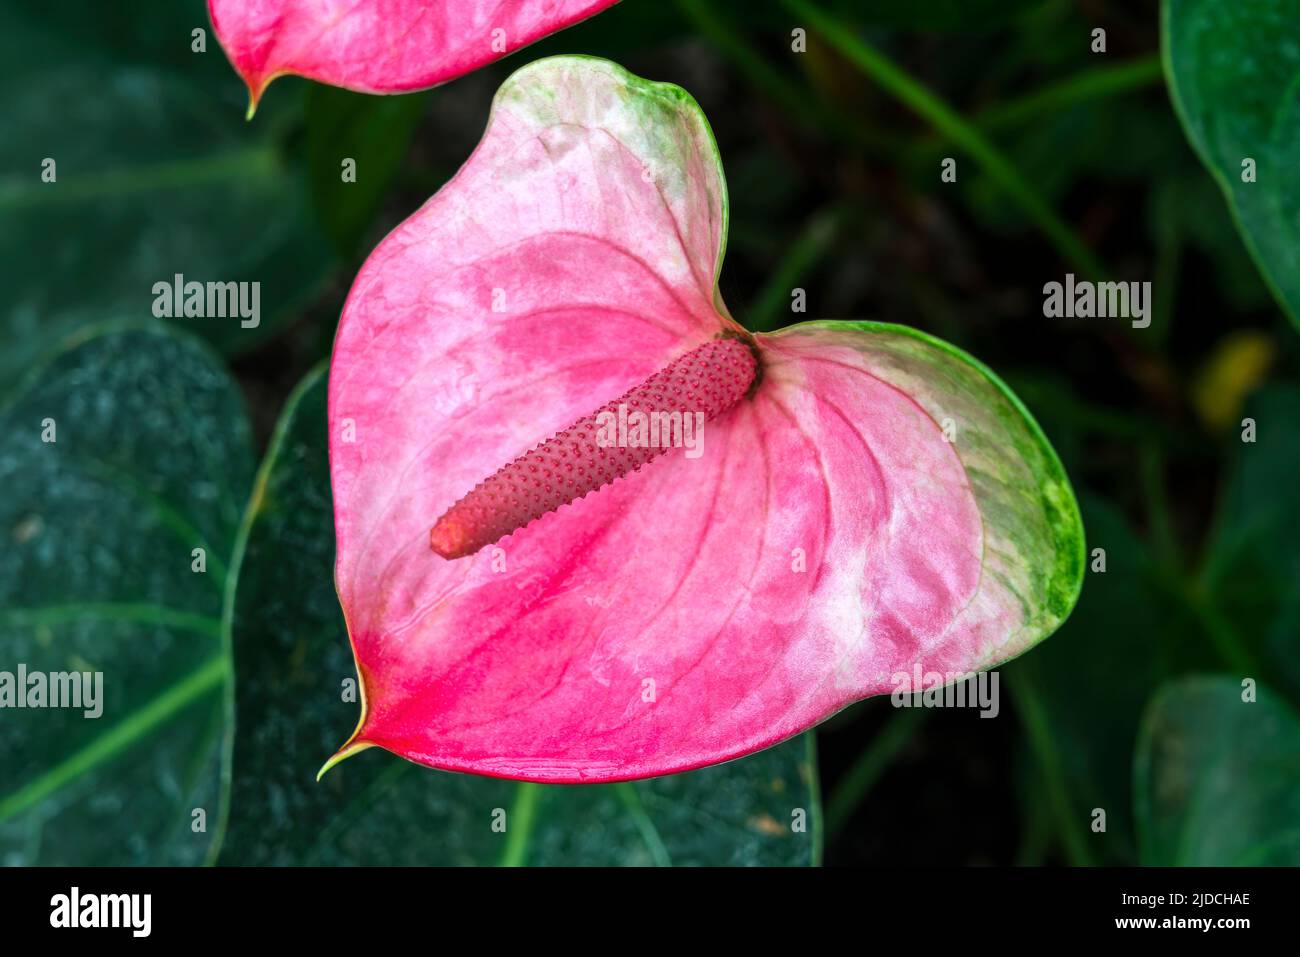 Anthurium x cultorum a spring summer flowering tropical shrub plant with a pink red summertime flower commonly known as flamingo lily and often used a Stock Photo